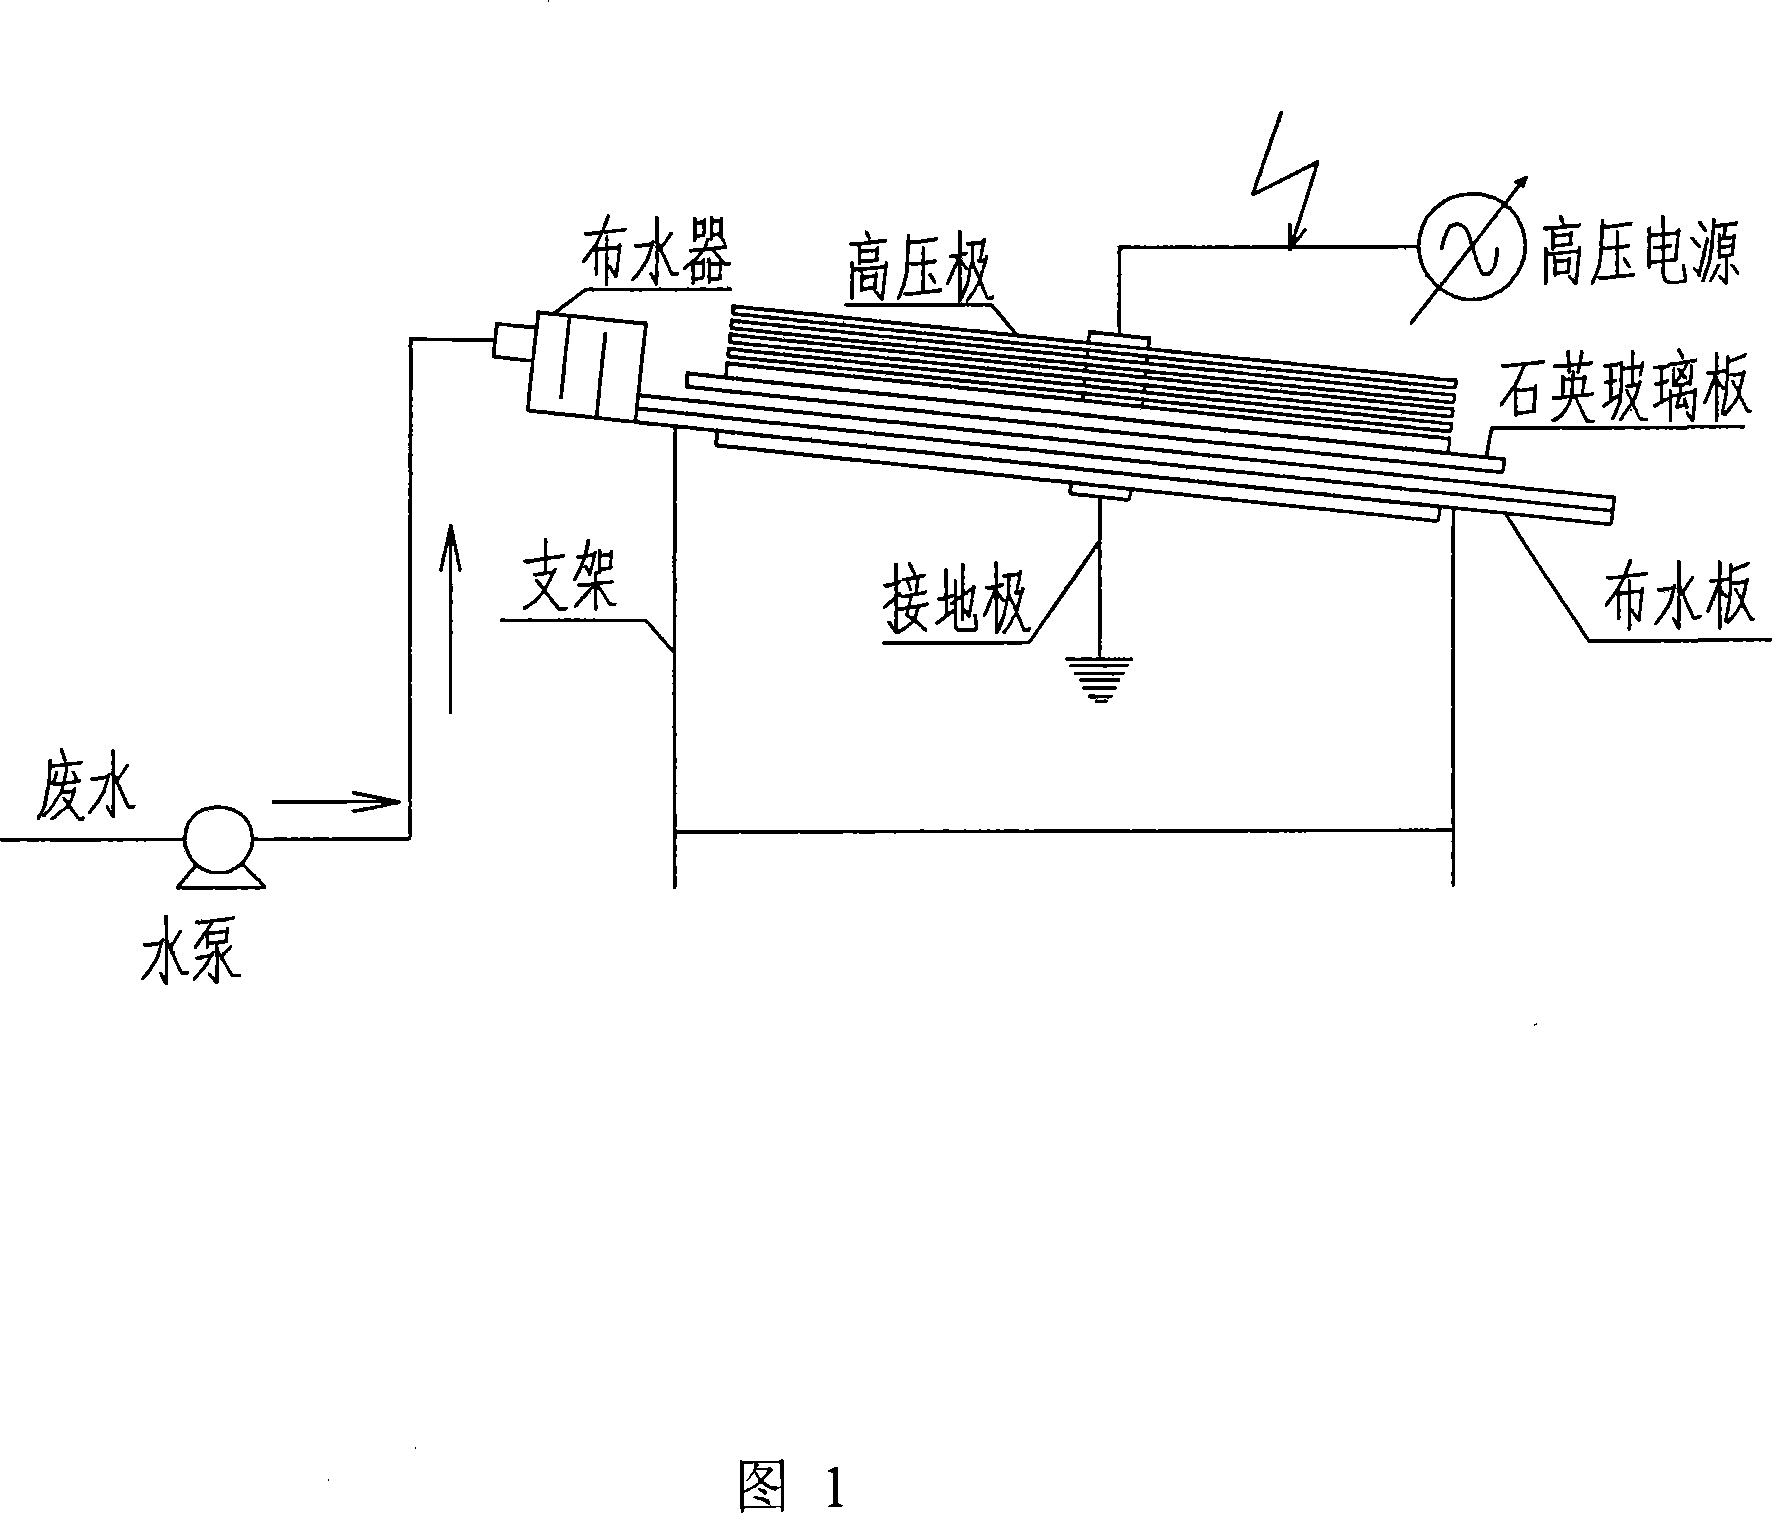 Method and device for treating waste water by employing low-temperature plasma technique